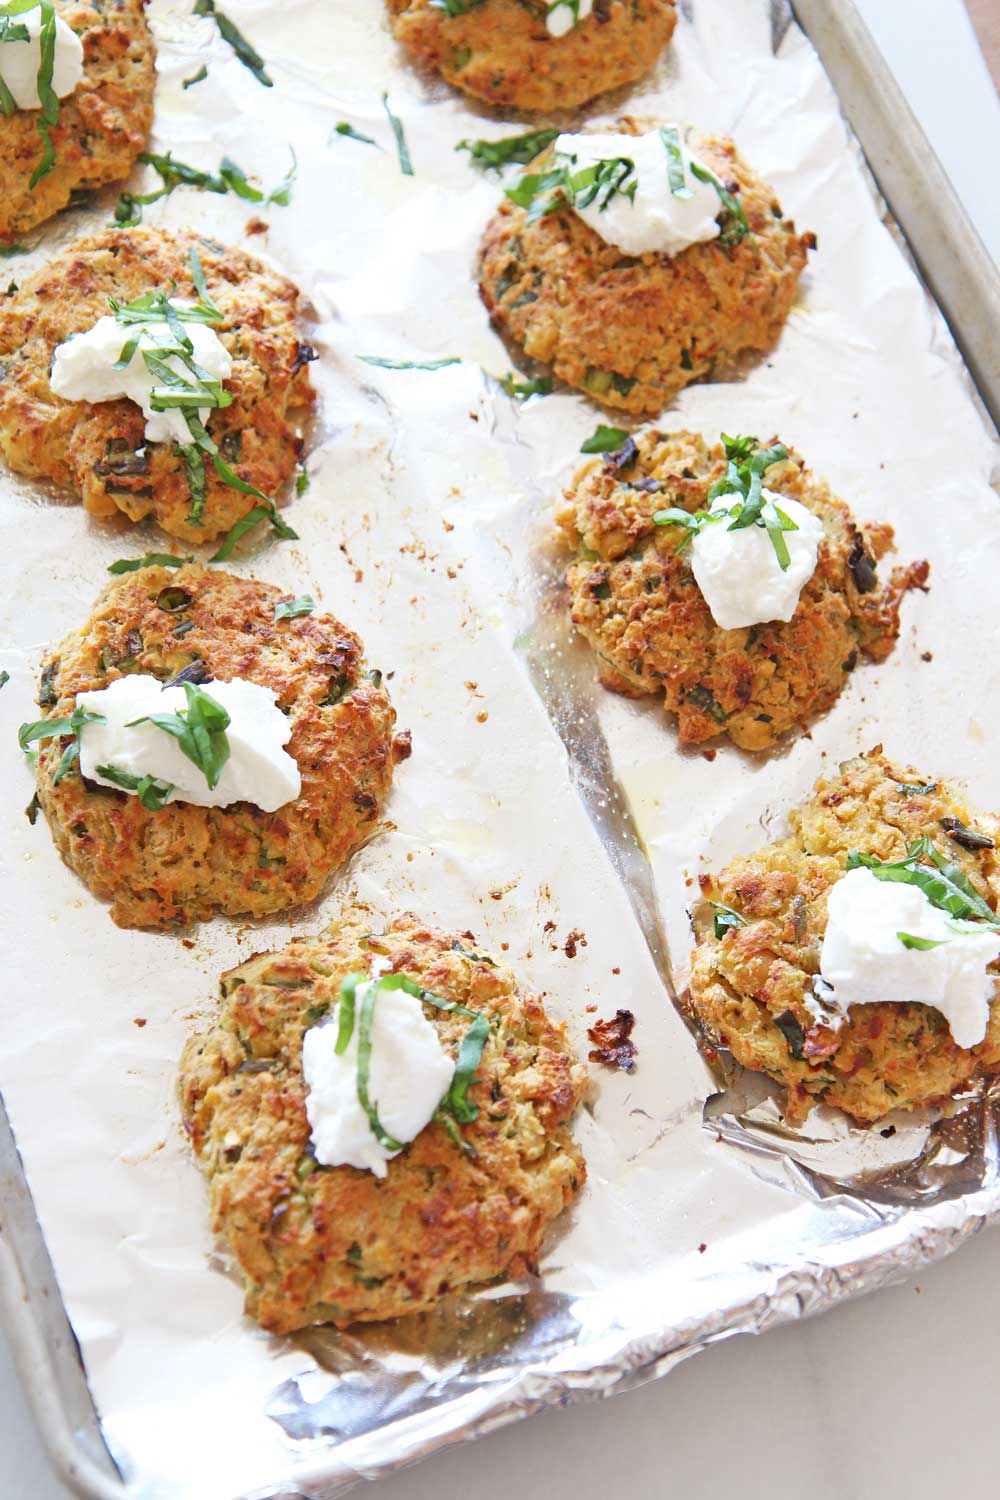 Cheesy Italian Chickpea Fritters (easy pantry recipe). Pantry ingredients make amazing dinners. By using the sheet pan this is a healthy recipe. No frying makes this healthier but also less mess. Grab chickpeas, ricotta, garlic powder, eggs, oregano, red pepper flakes, bread crumbs, and salt/ pepper. Happy Cooking! www.ChopHappy.com #chickpeas #pantryrecipe